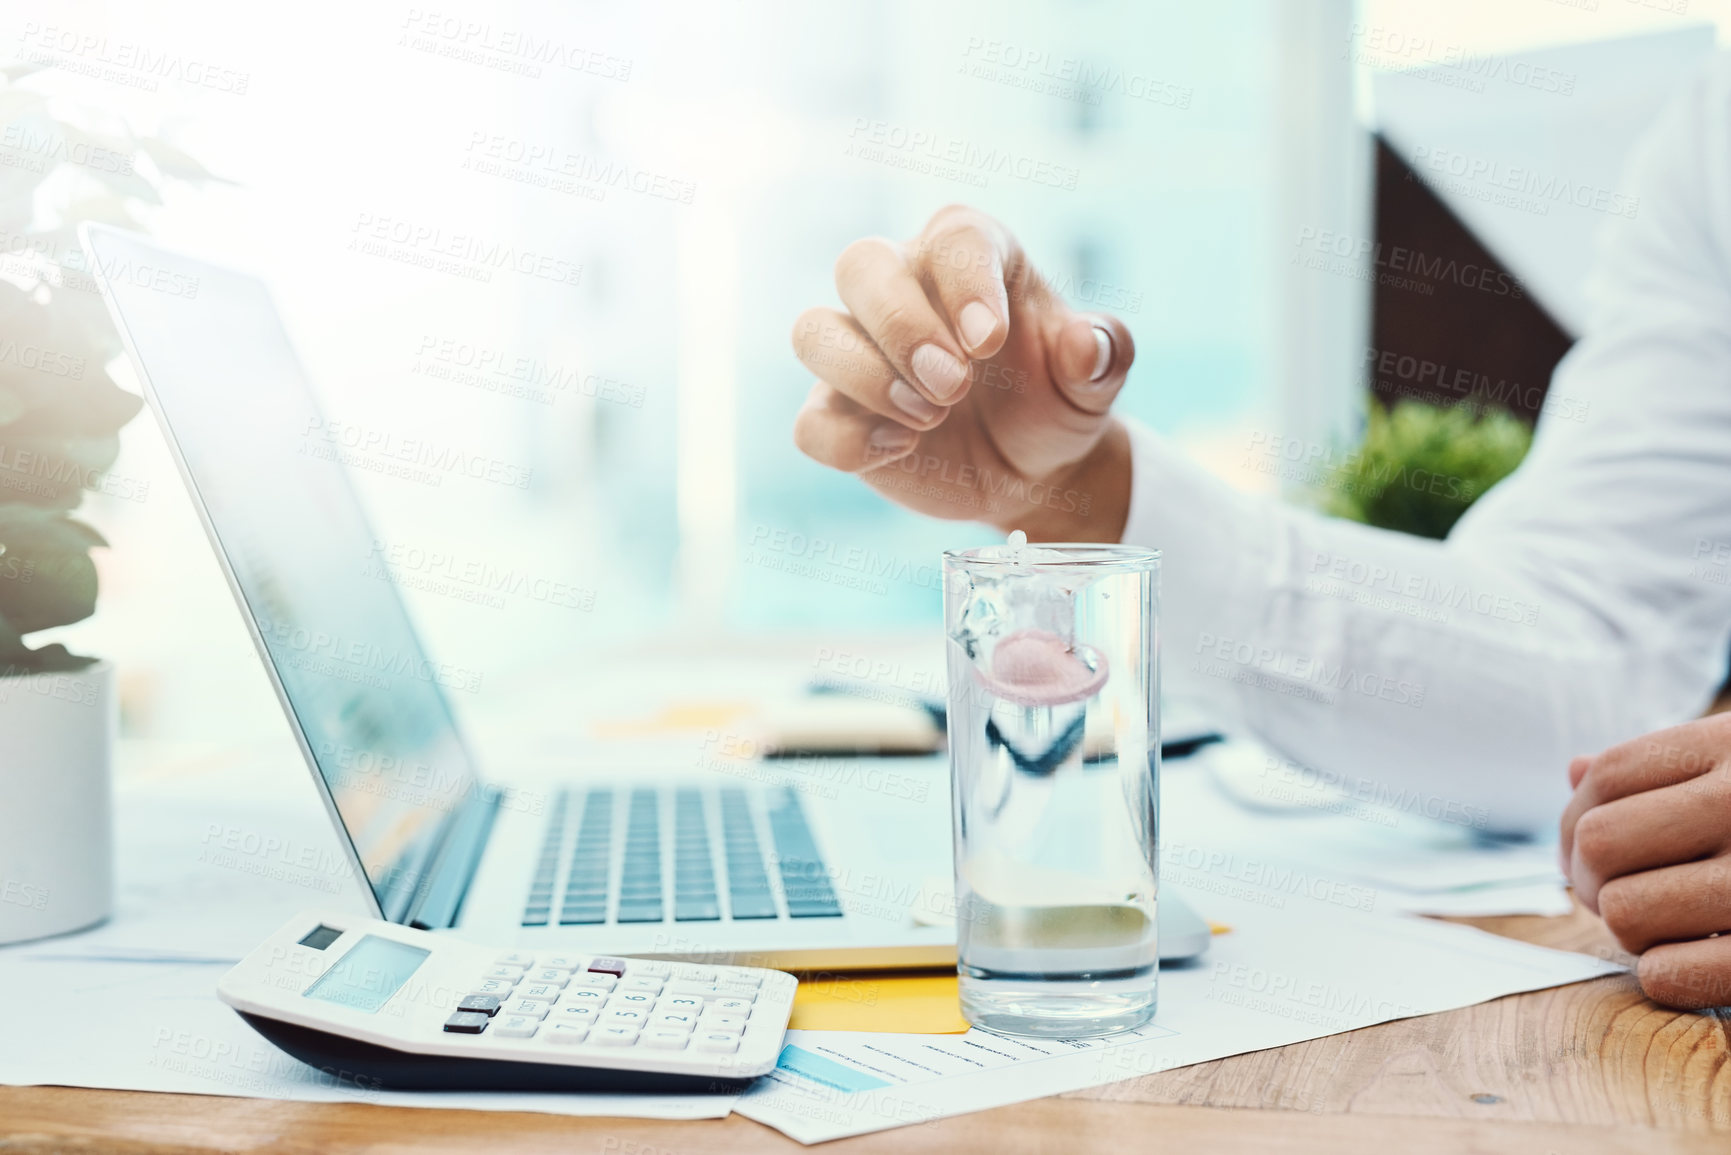 Buy stock photo Shot of an unrecognisable businessman dissolving an effervescent tablet in a glass of water